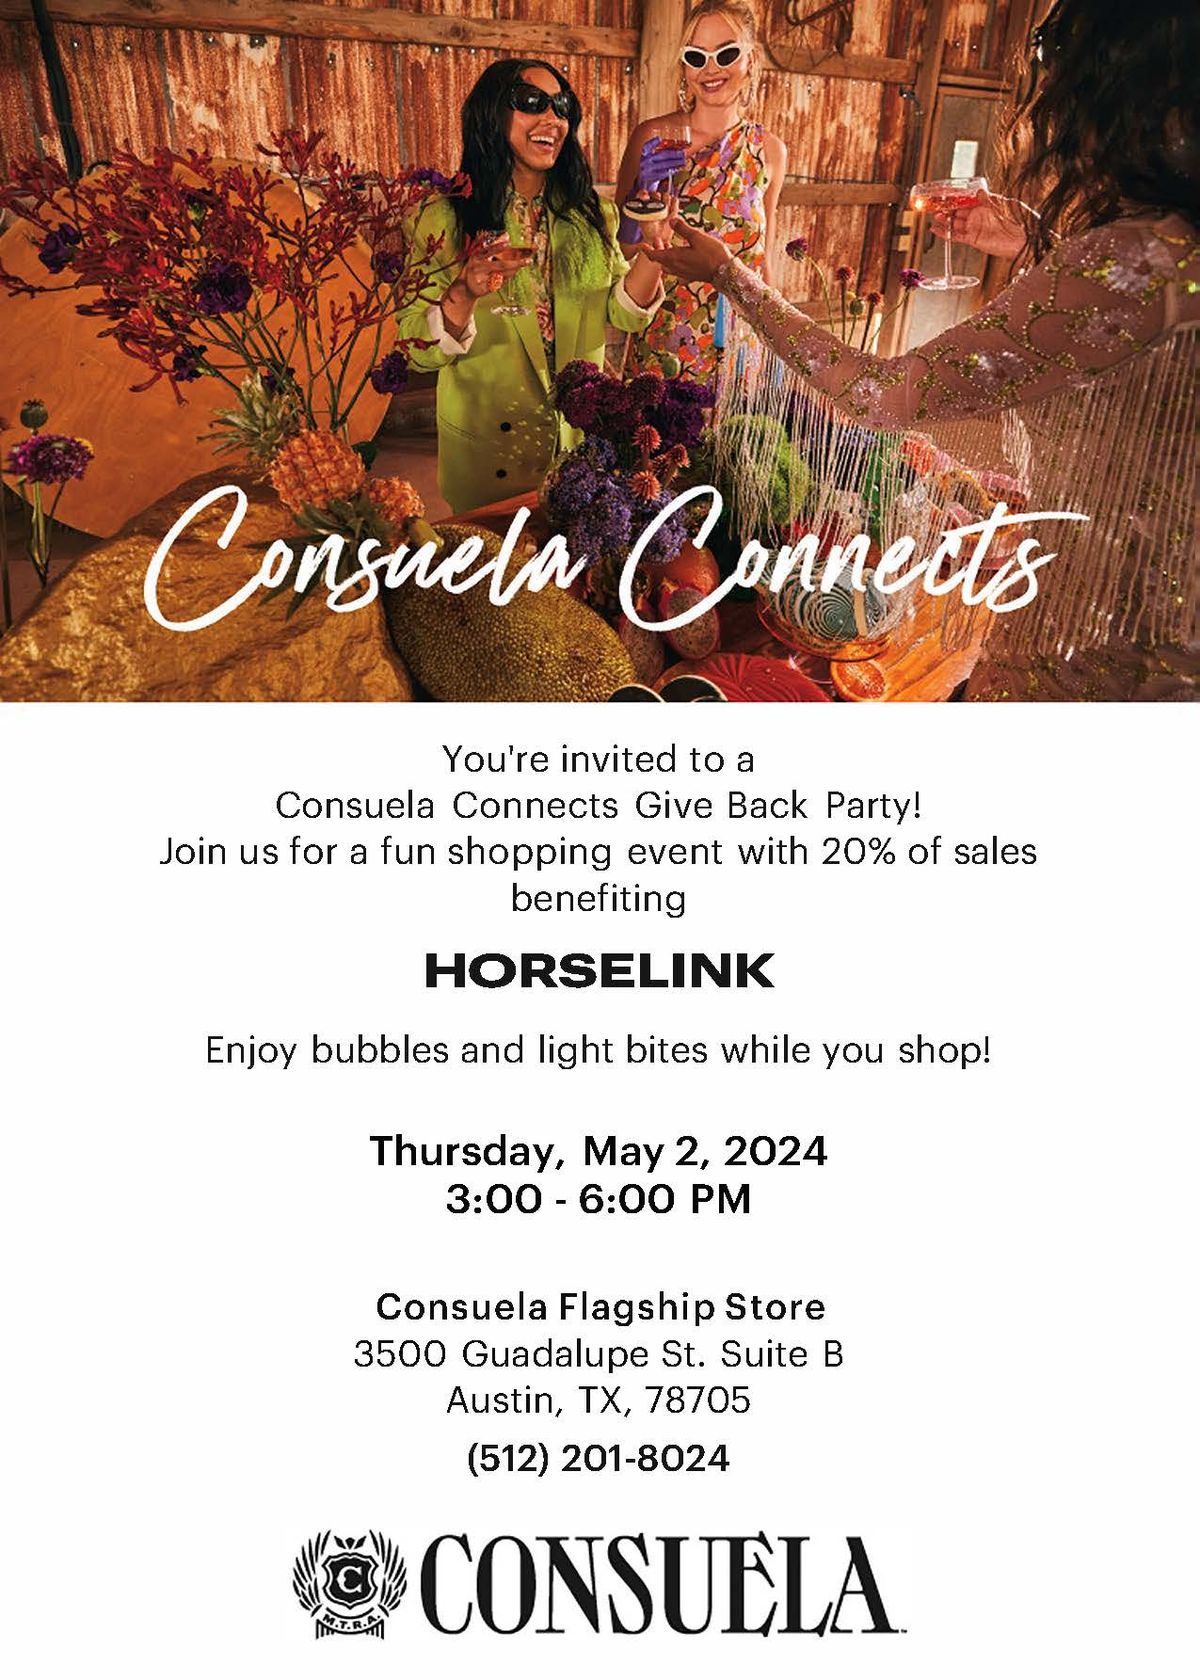 Consuela Connects & Gives Back to HorseLink